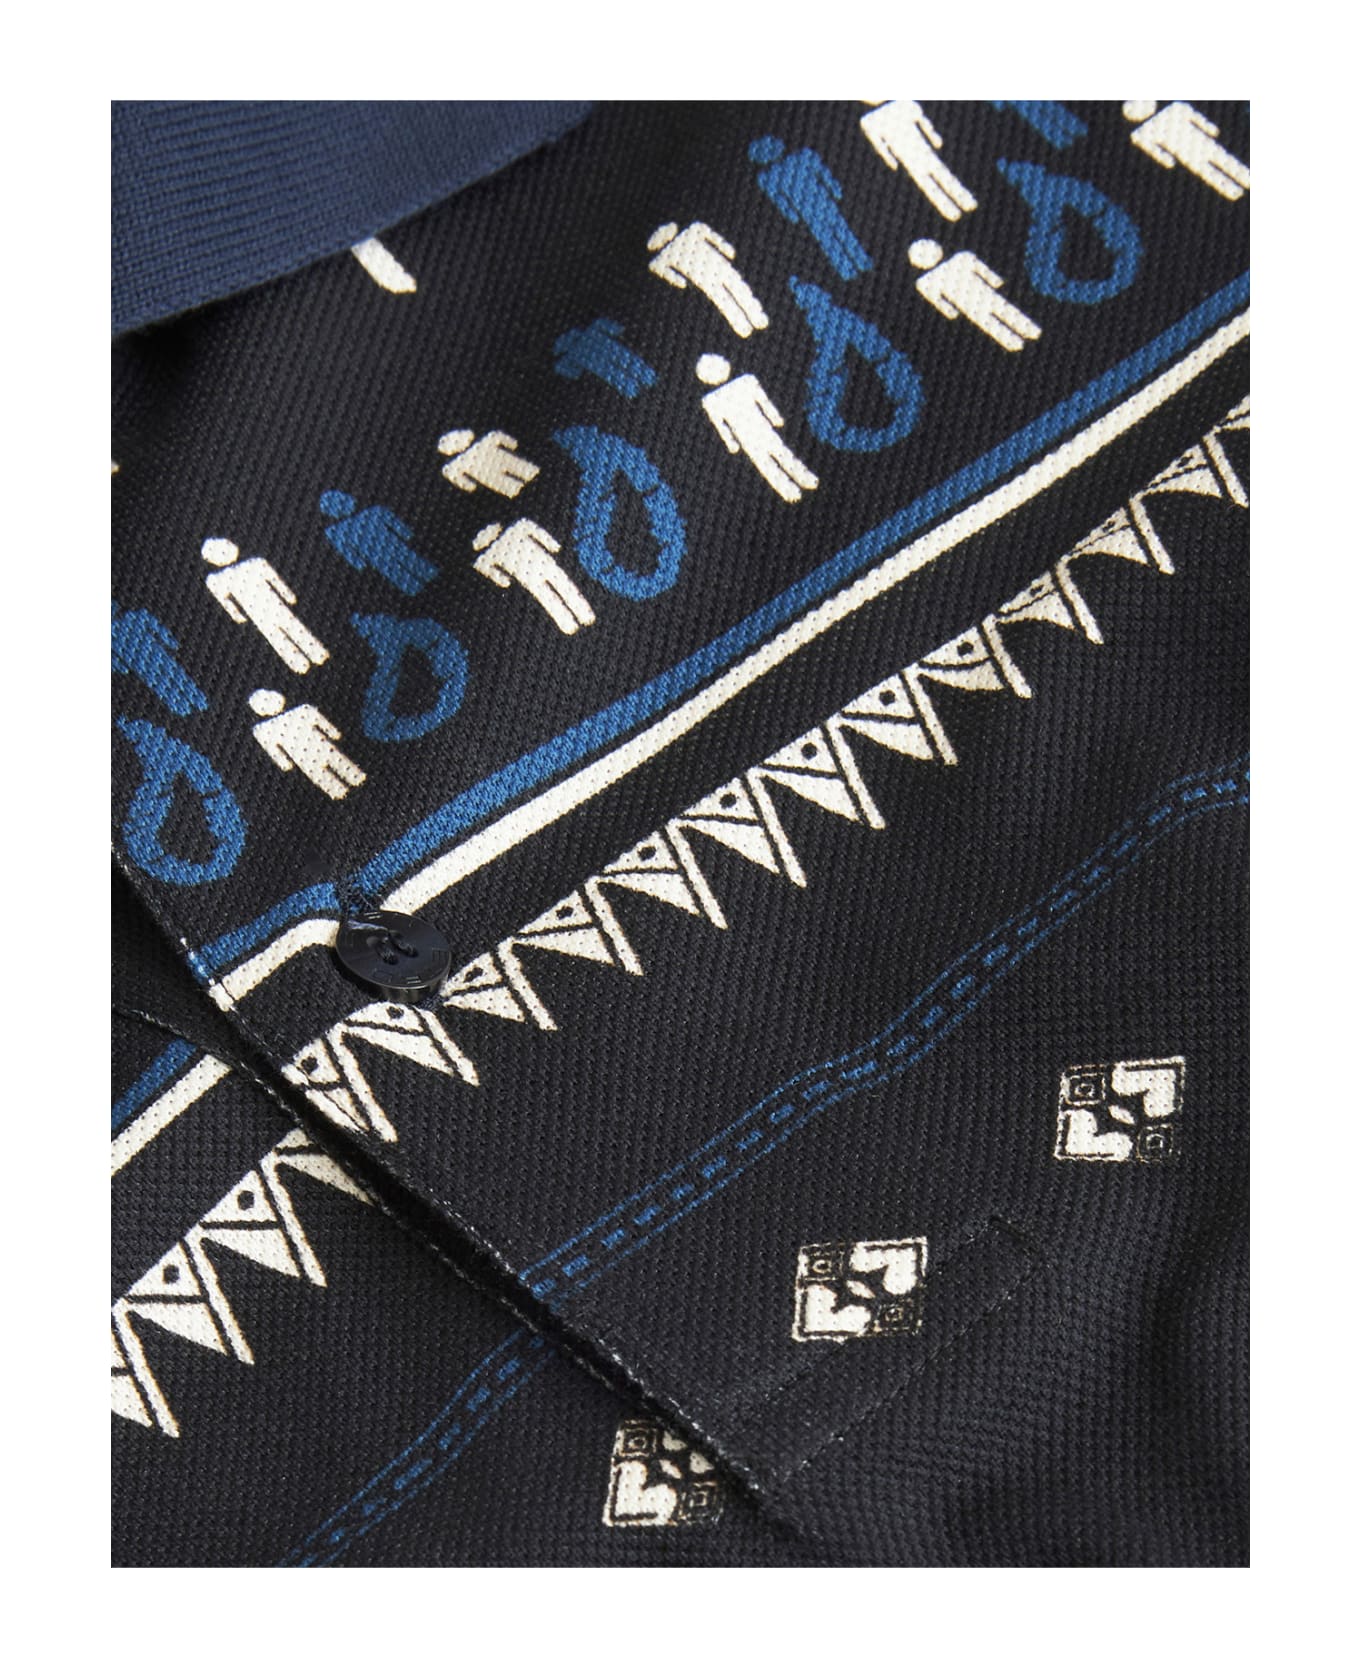 Etro Navy Blue Polo Shirt With Geometric Print - Blue ポロシャツ